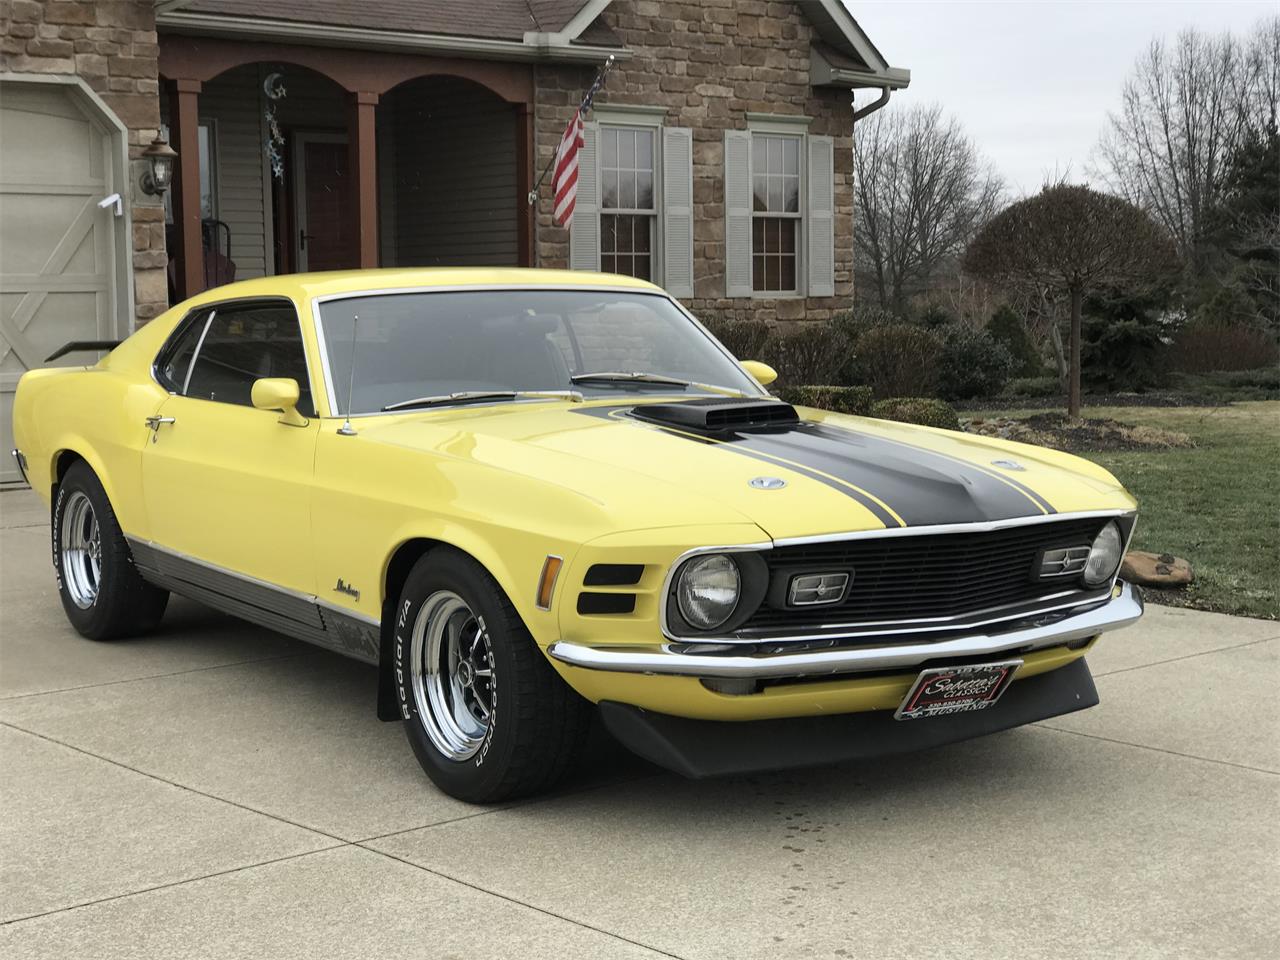 1970 Ford Mustang Mach 1 for sale in Orville, OH / classiccarsbay.com